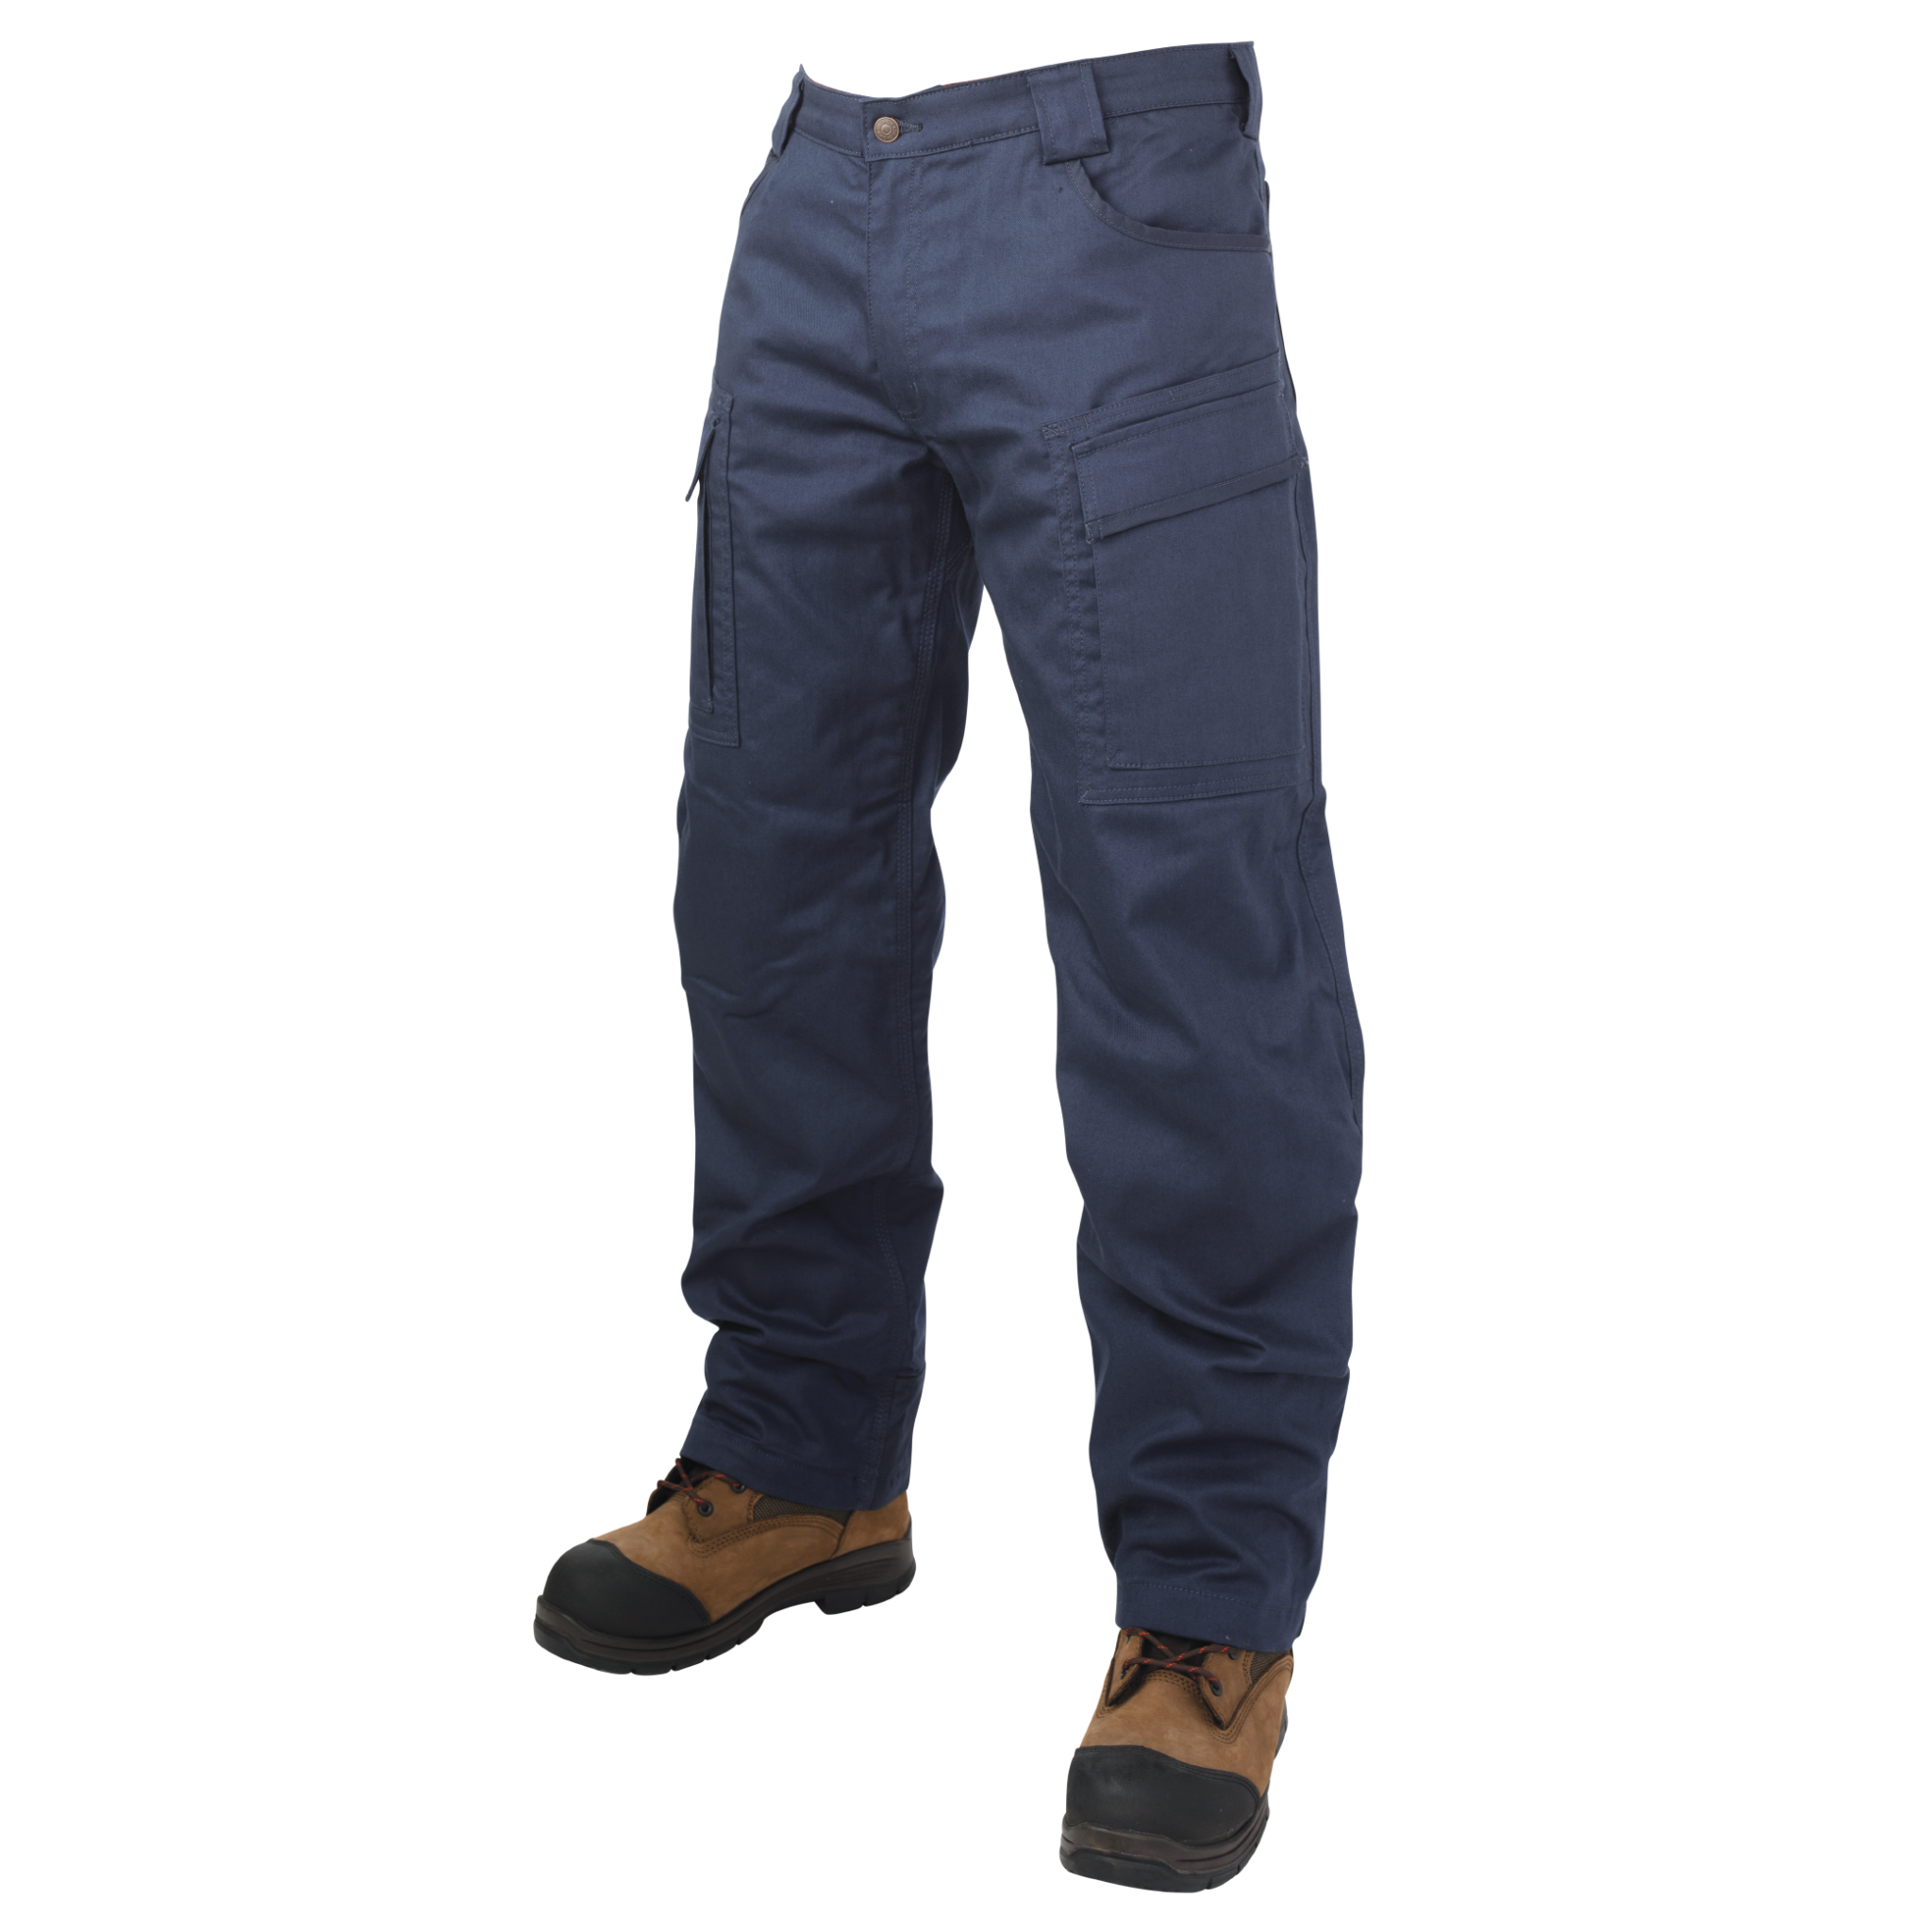 https://toughduck.com/wp-content/uploads/2020/10/WP06-PANT-FRONT-NAVY_resized-01.png